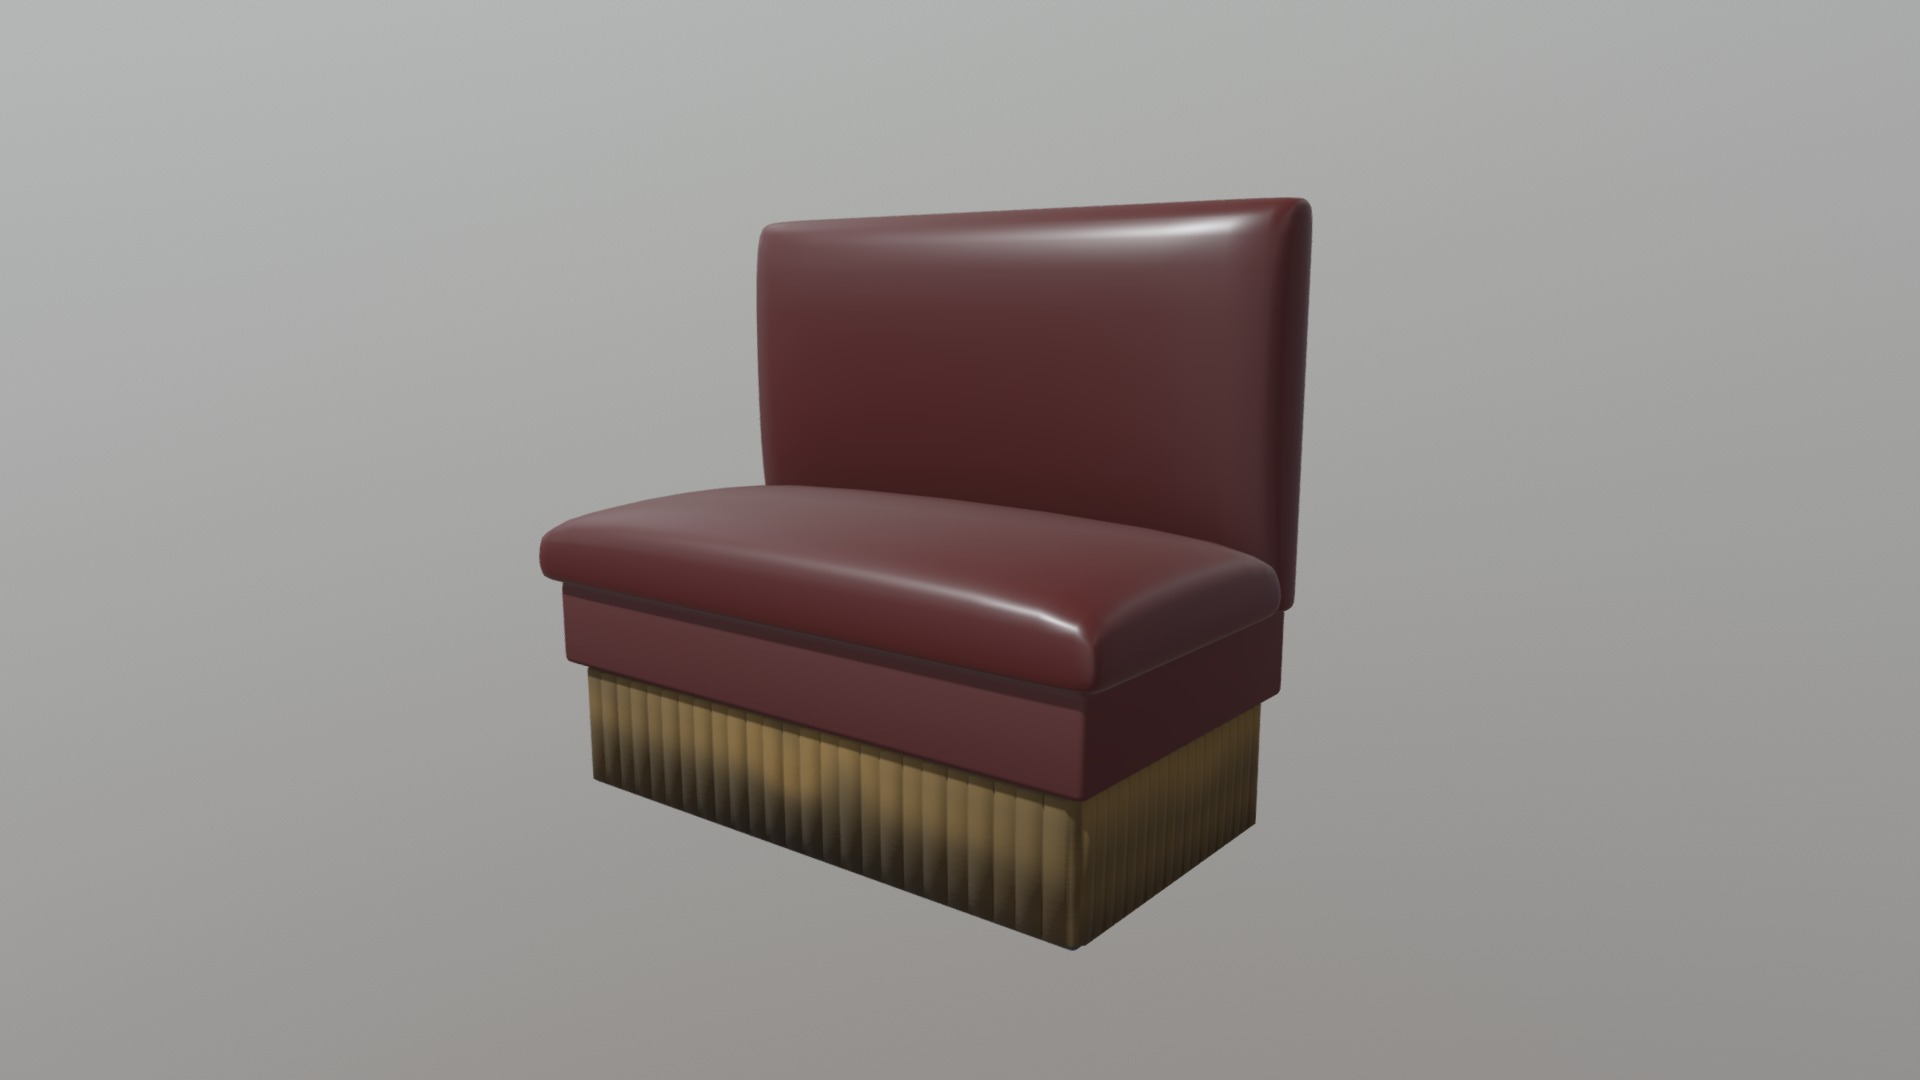 3D model Restaurant Single Booth - This is a 3D model of the Restaurant Single Booth. The 3D model is about a red chair with a cushion.